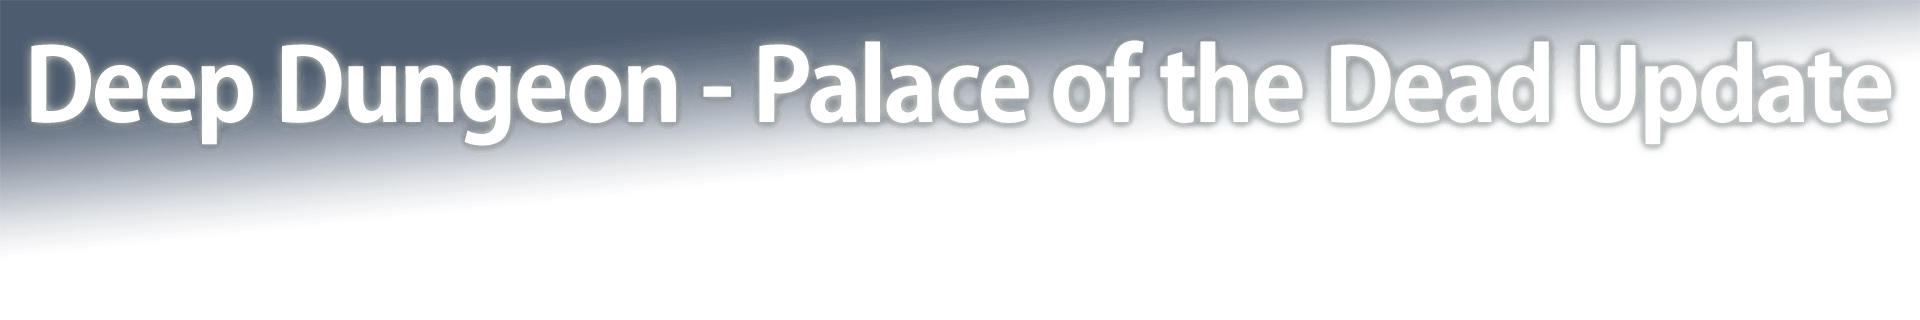 Deep Dungeon - Palace of the Dead Update